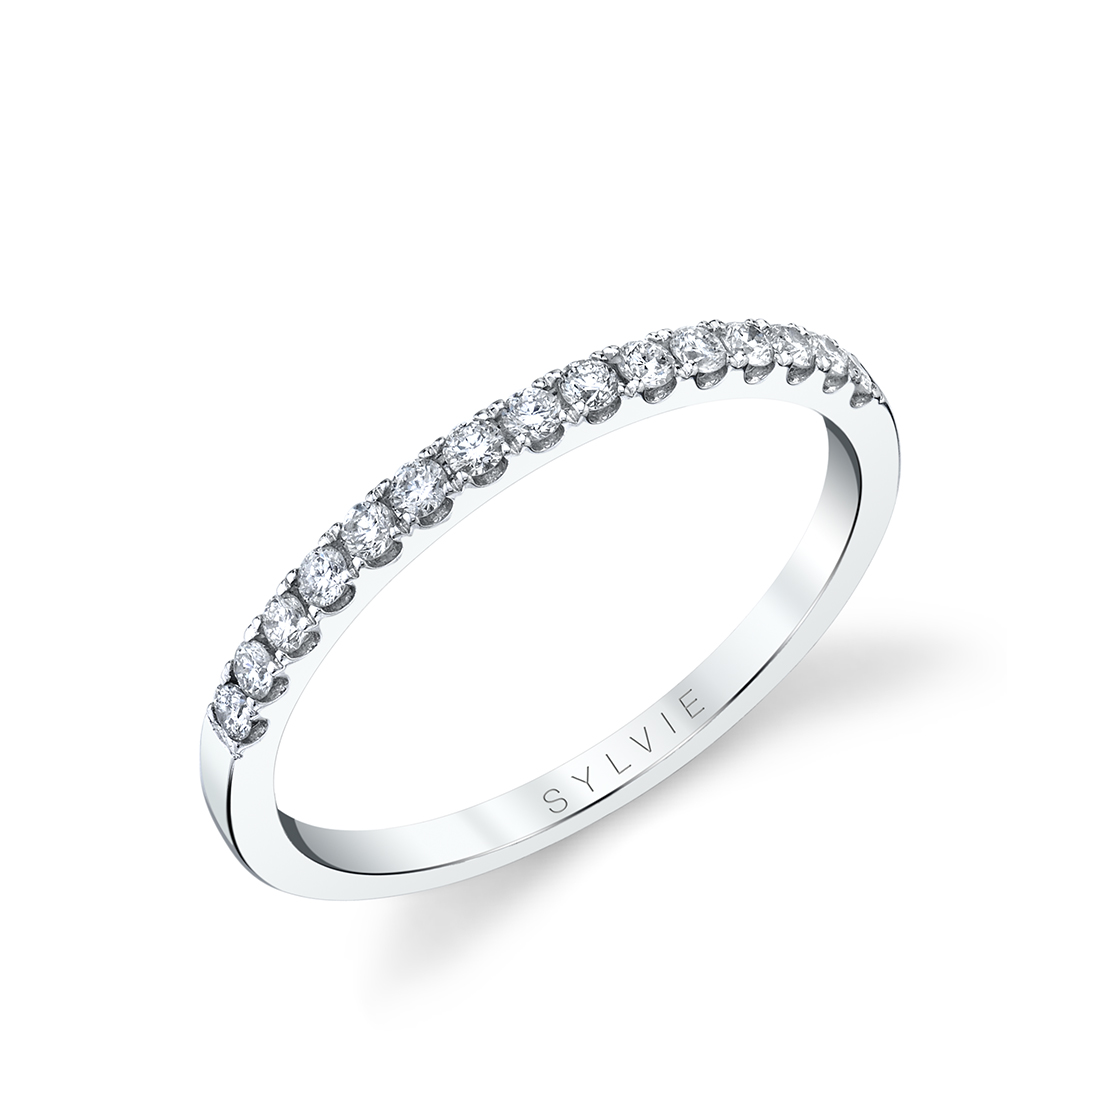 Profile Image of a Modern Princess Cut Engagement Ring with Halo